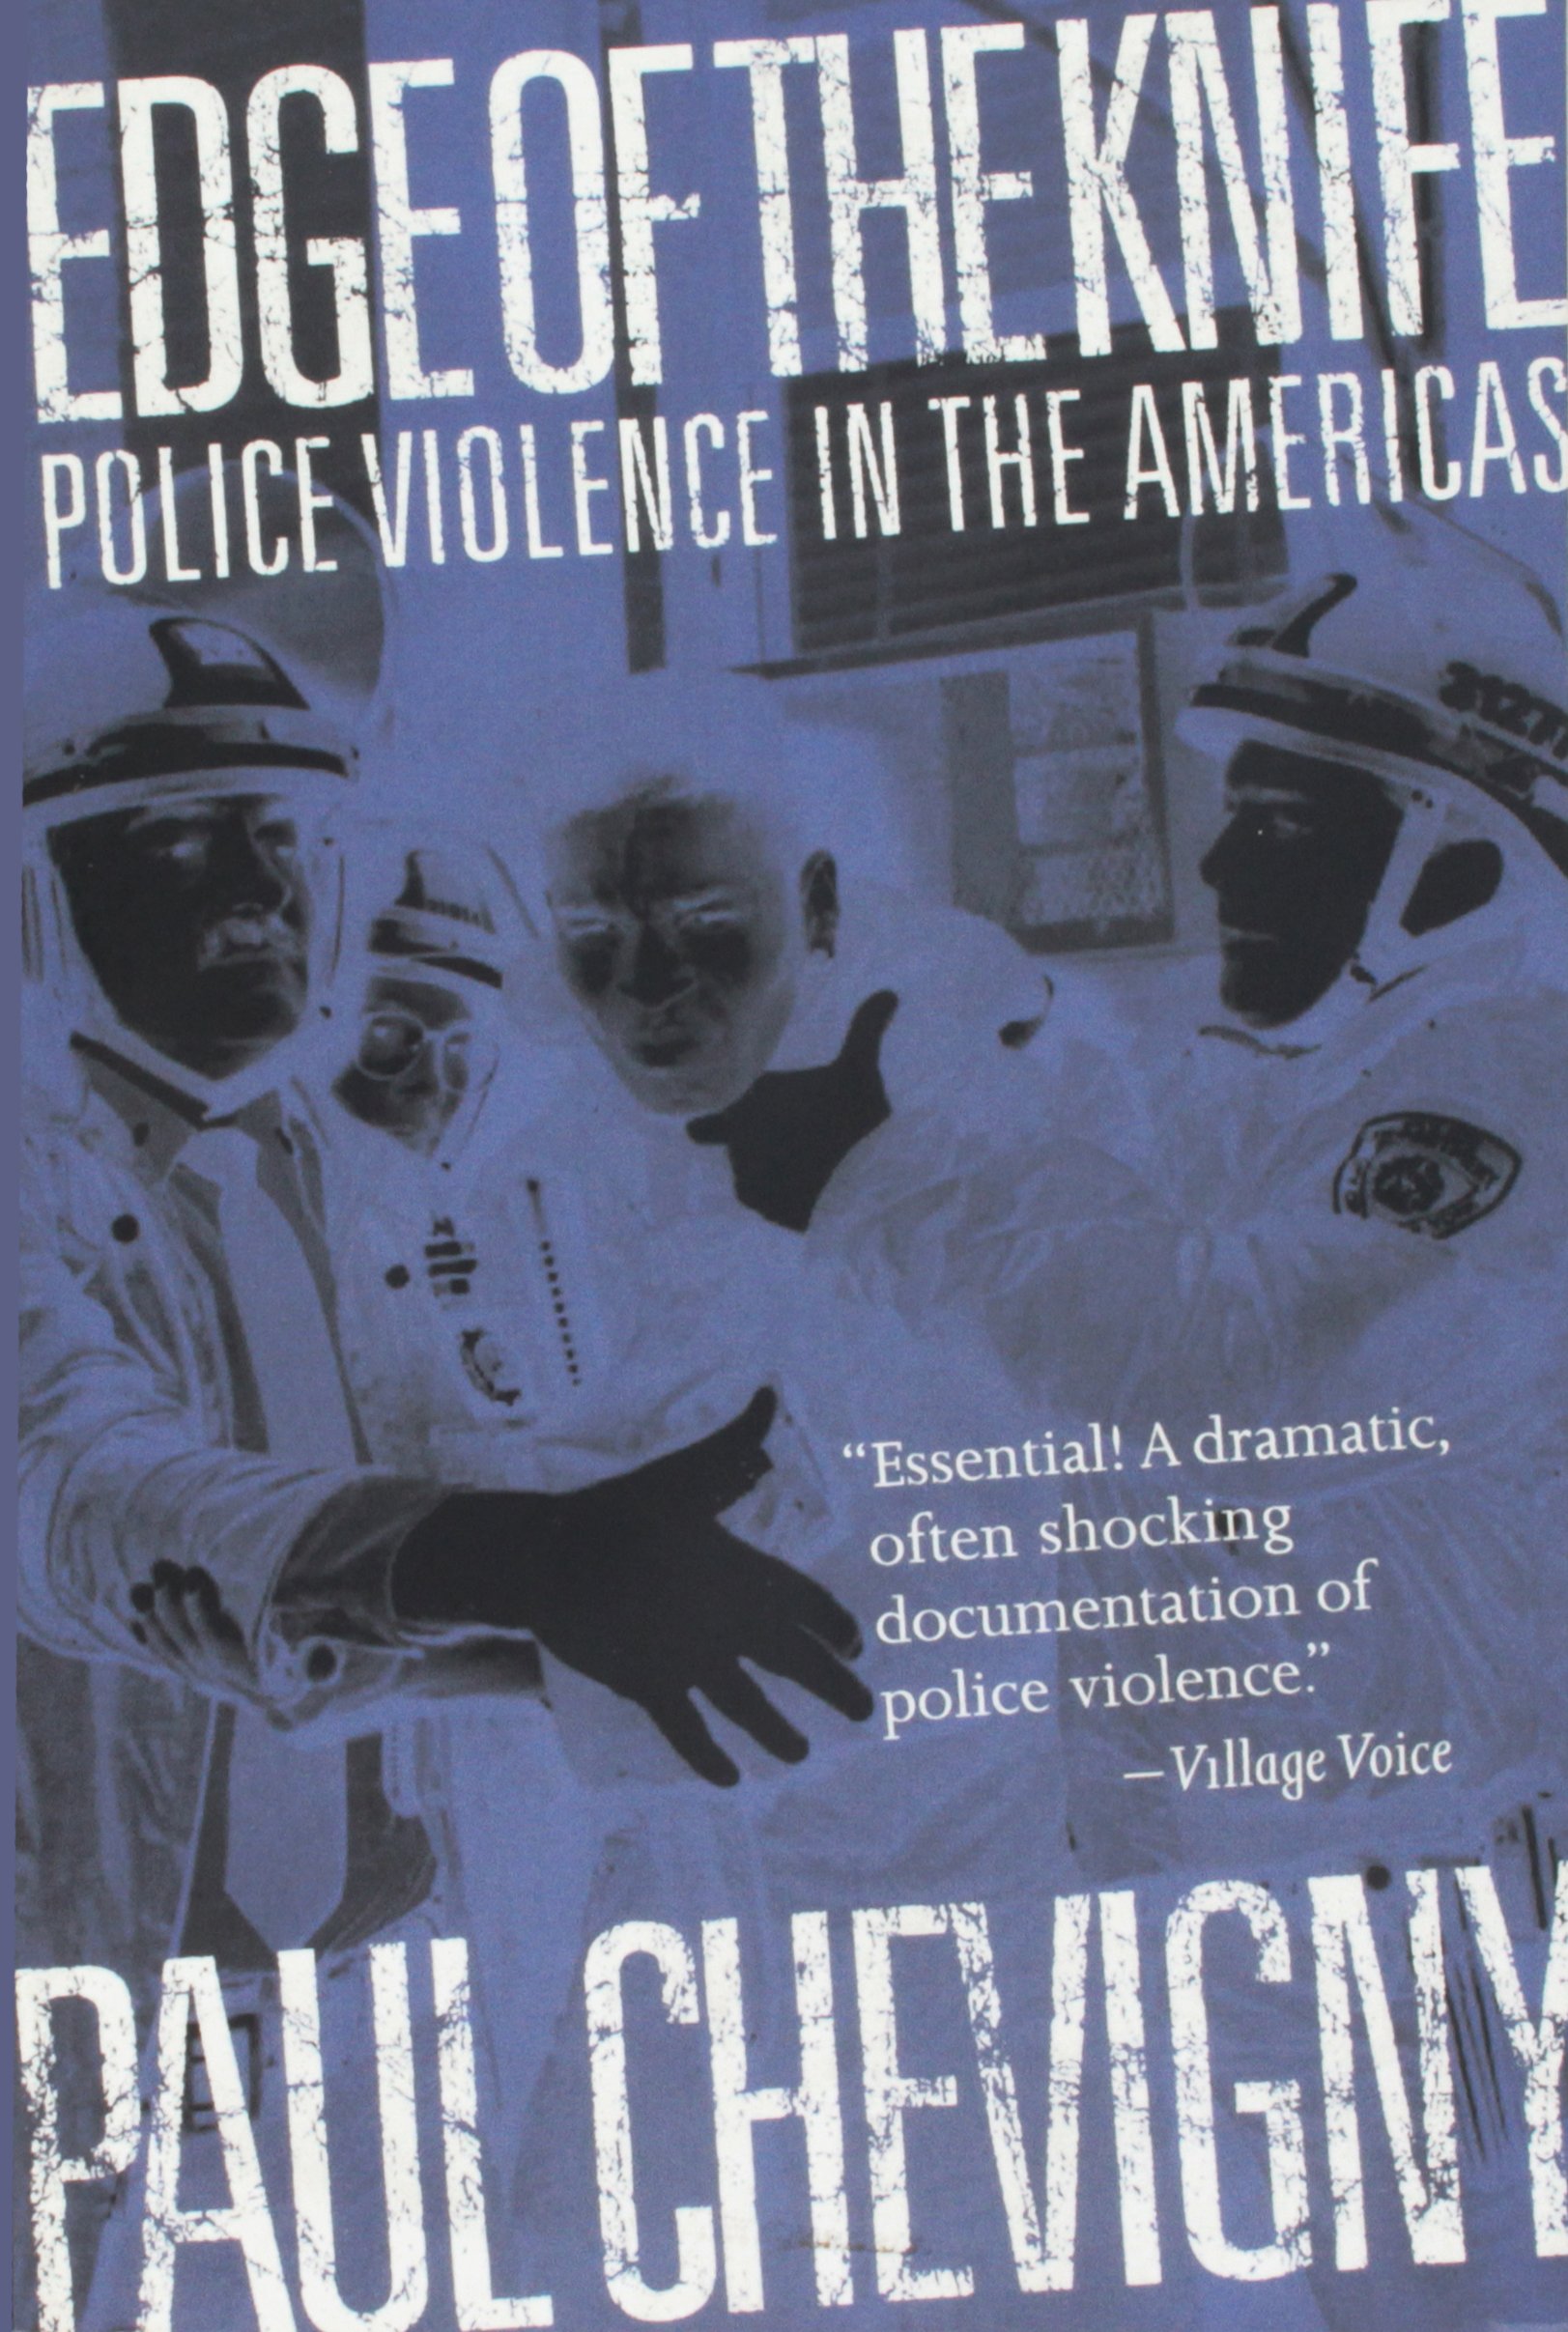 Edge of the Knife: Police Violence in the Americas